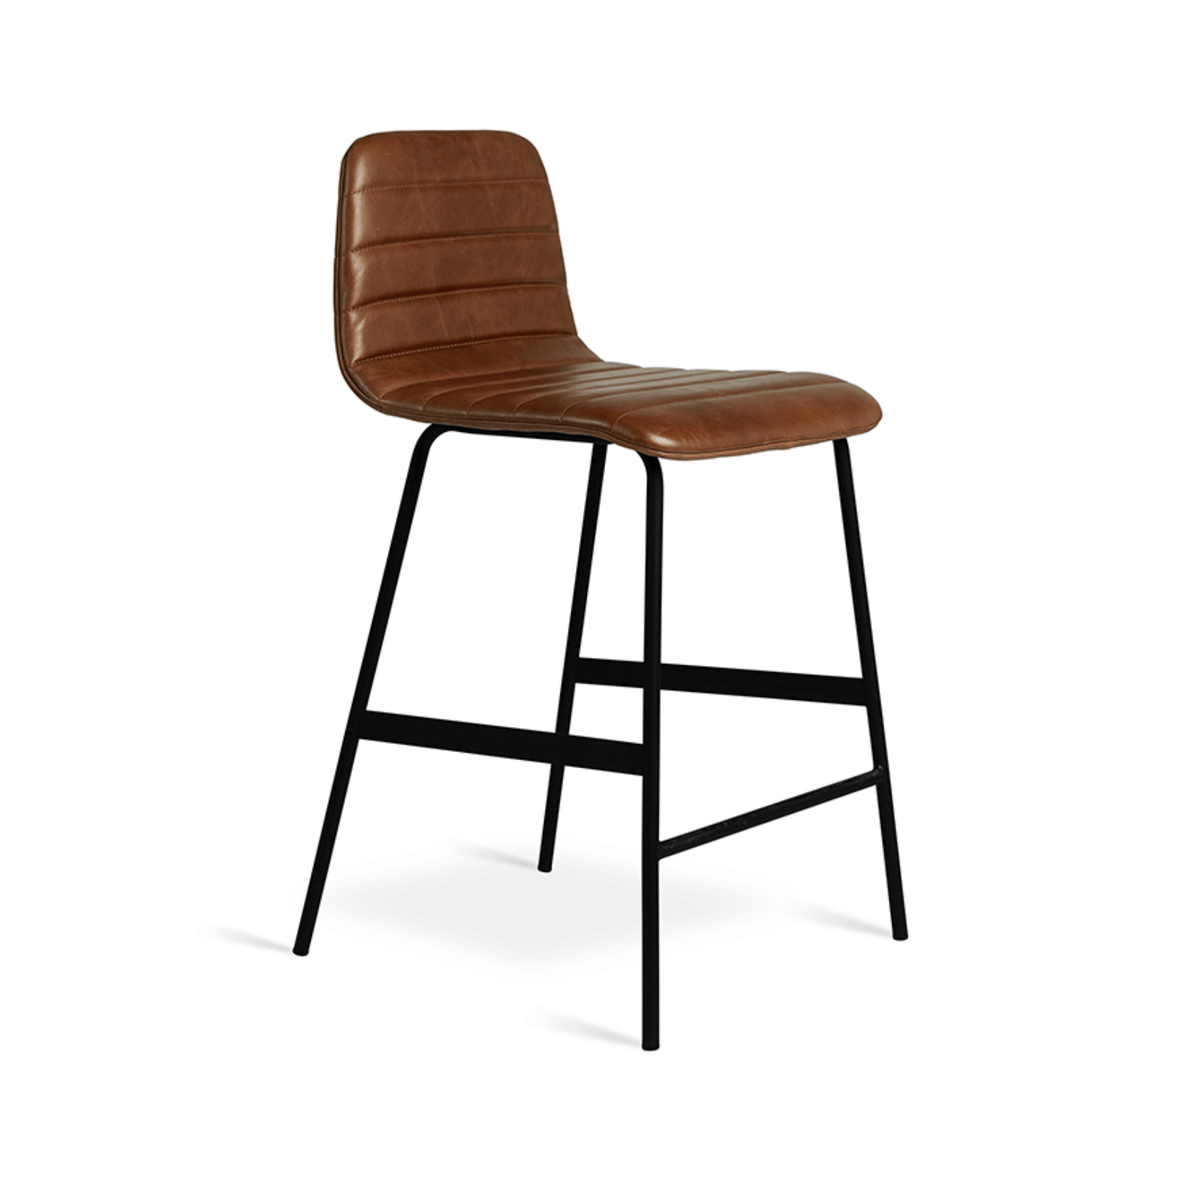 Lecture Bench Barstool | Saddle Brown Leather - CLU Living Pty Ltd